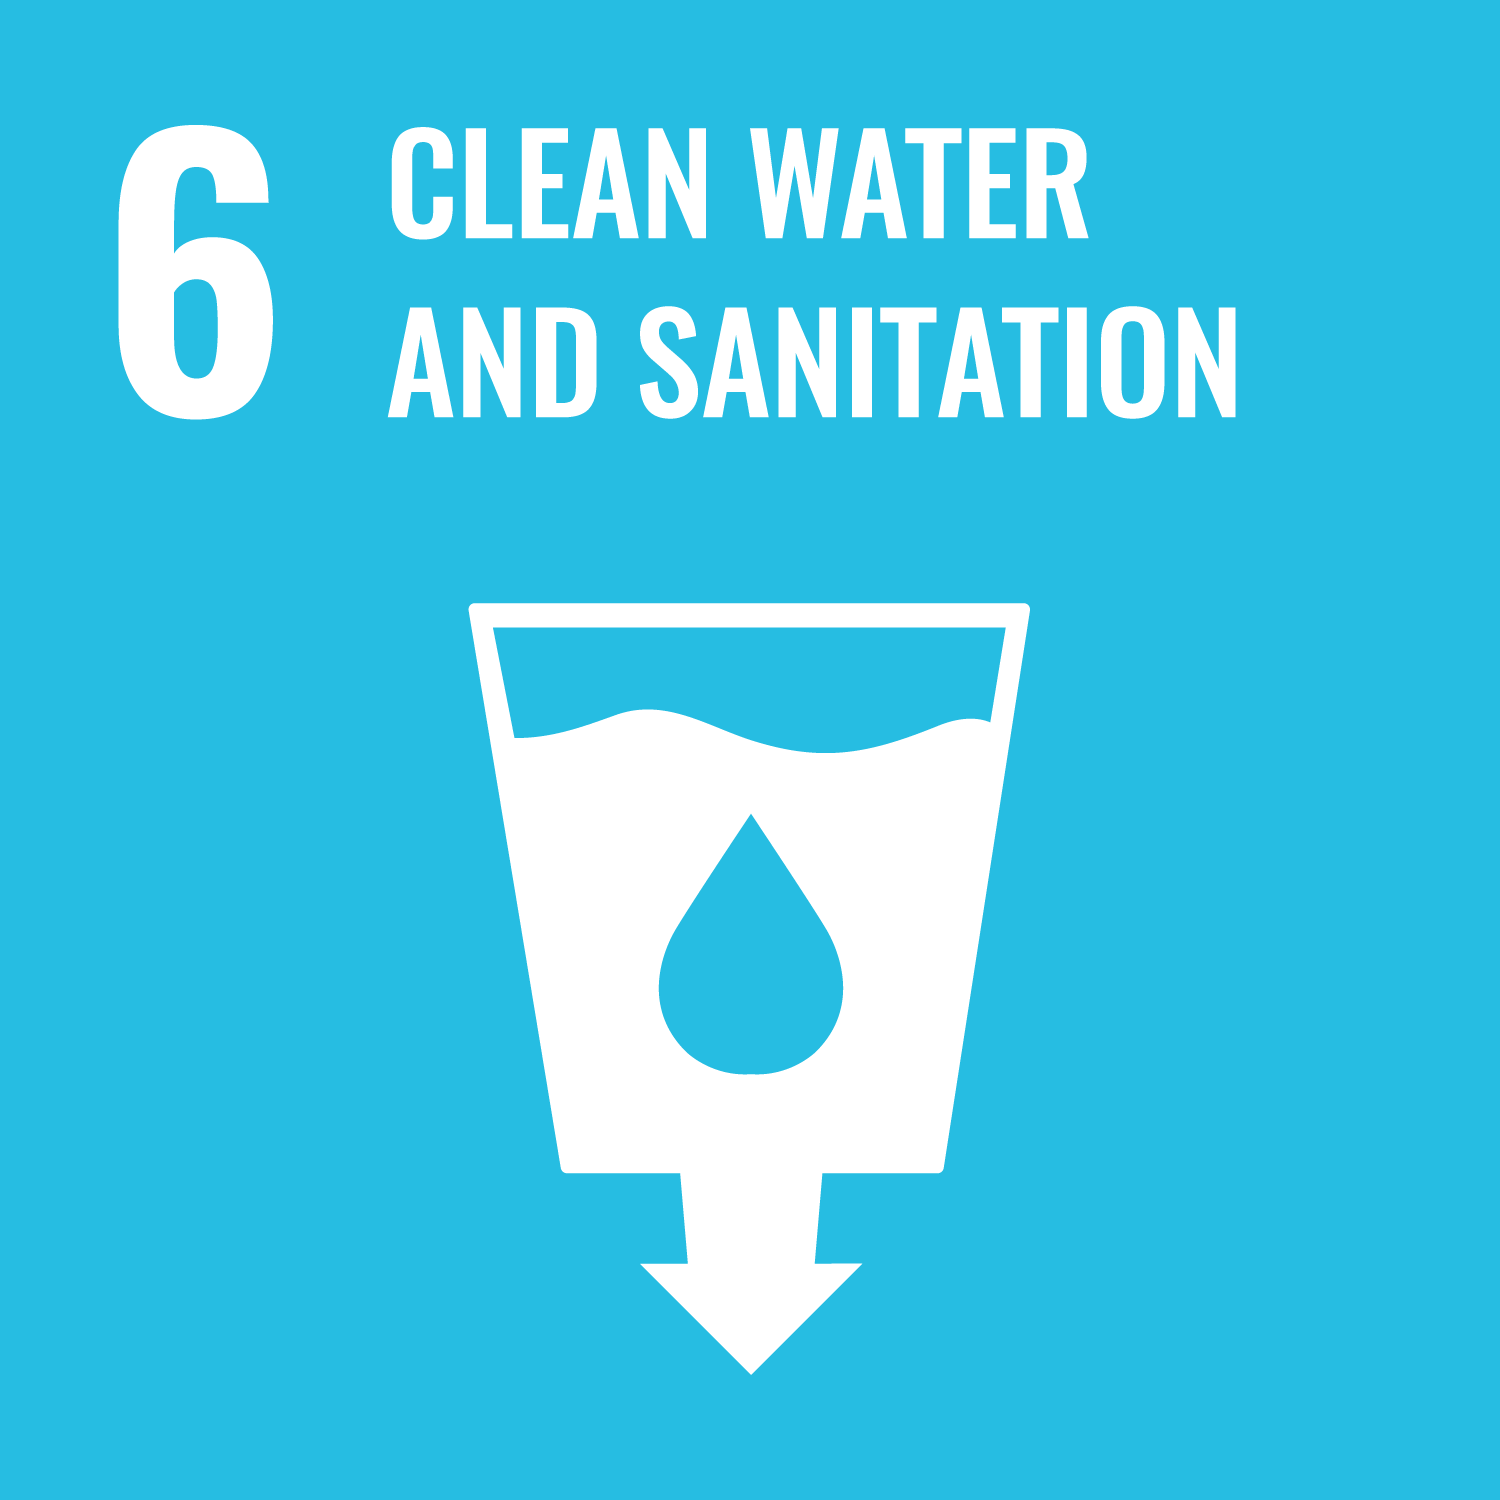 An icon for UN SDG #6 - Clean Water and Sanitation. It depicts a glass of water against a blue background.